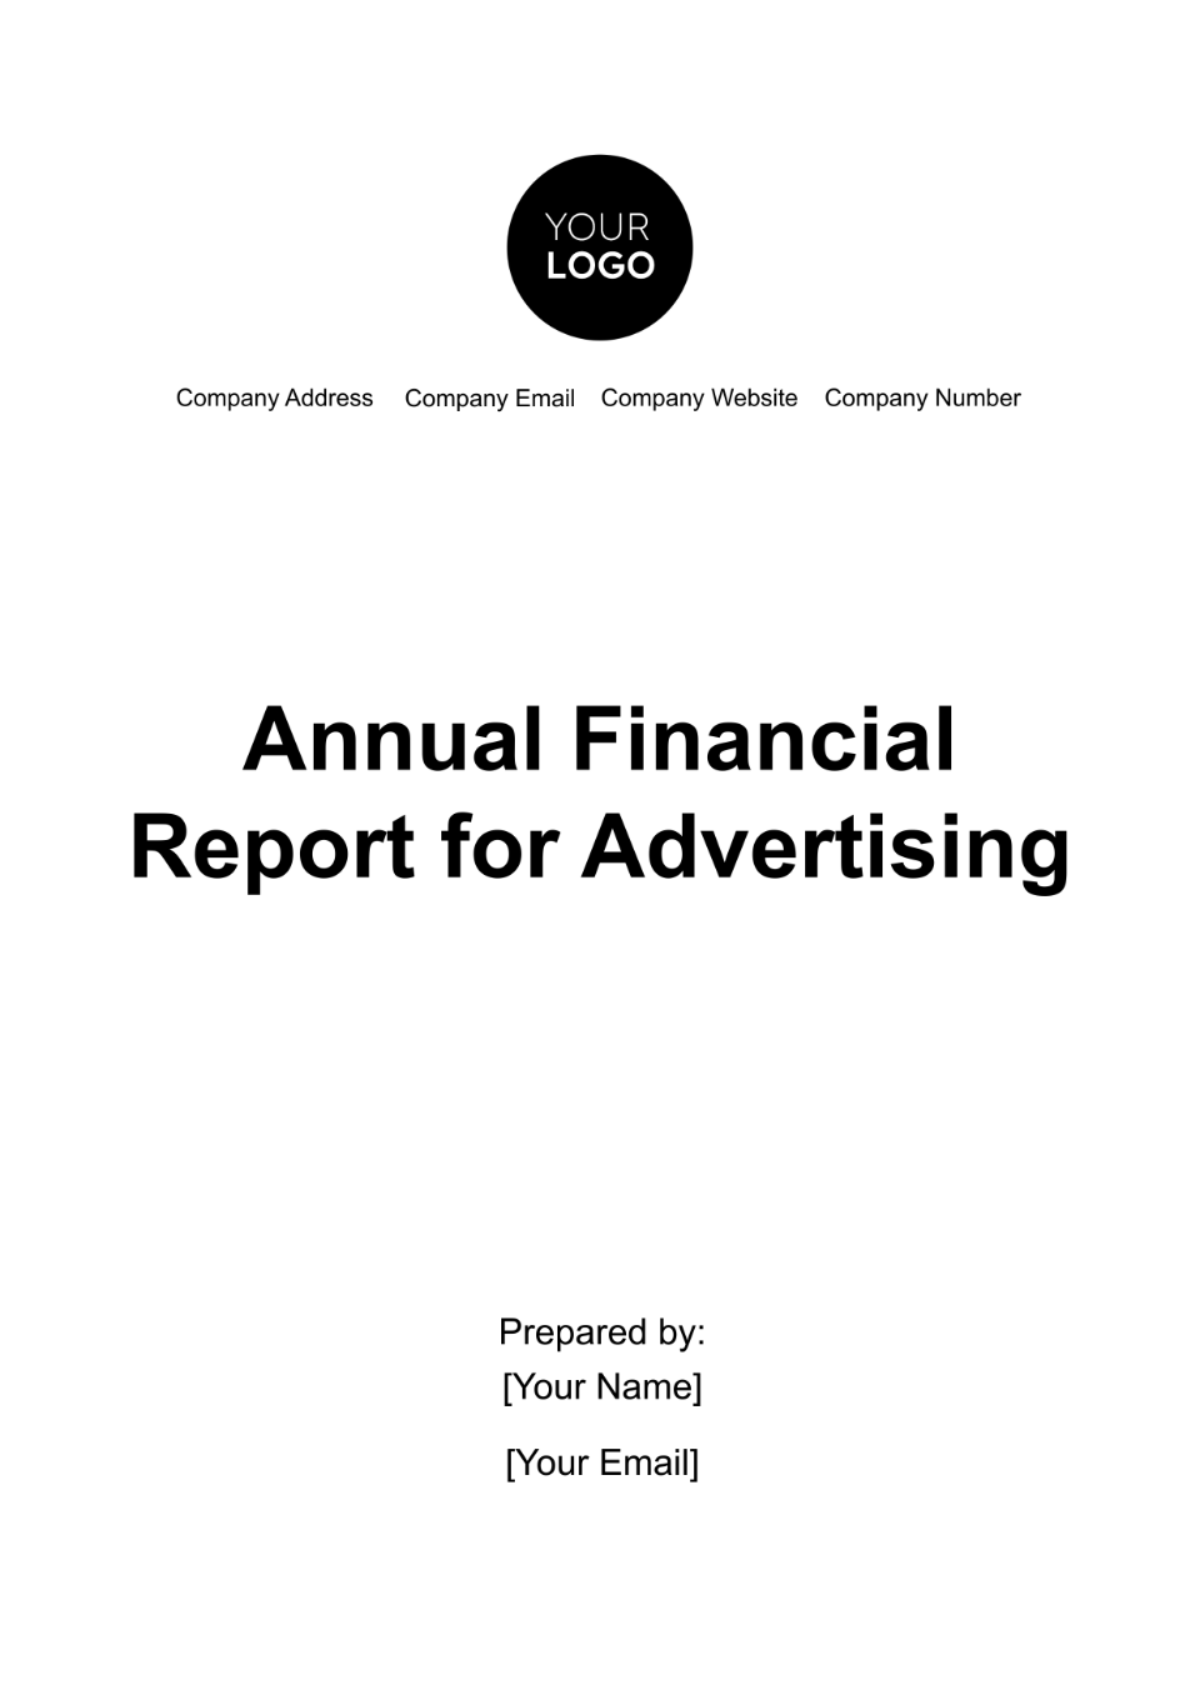 Free Annual Financial Report for Advertising Template